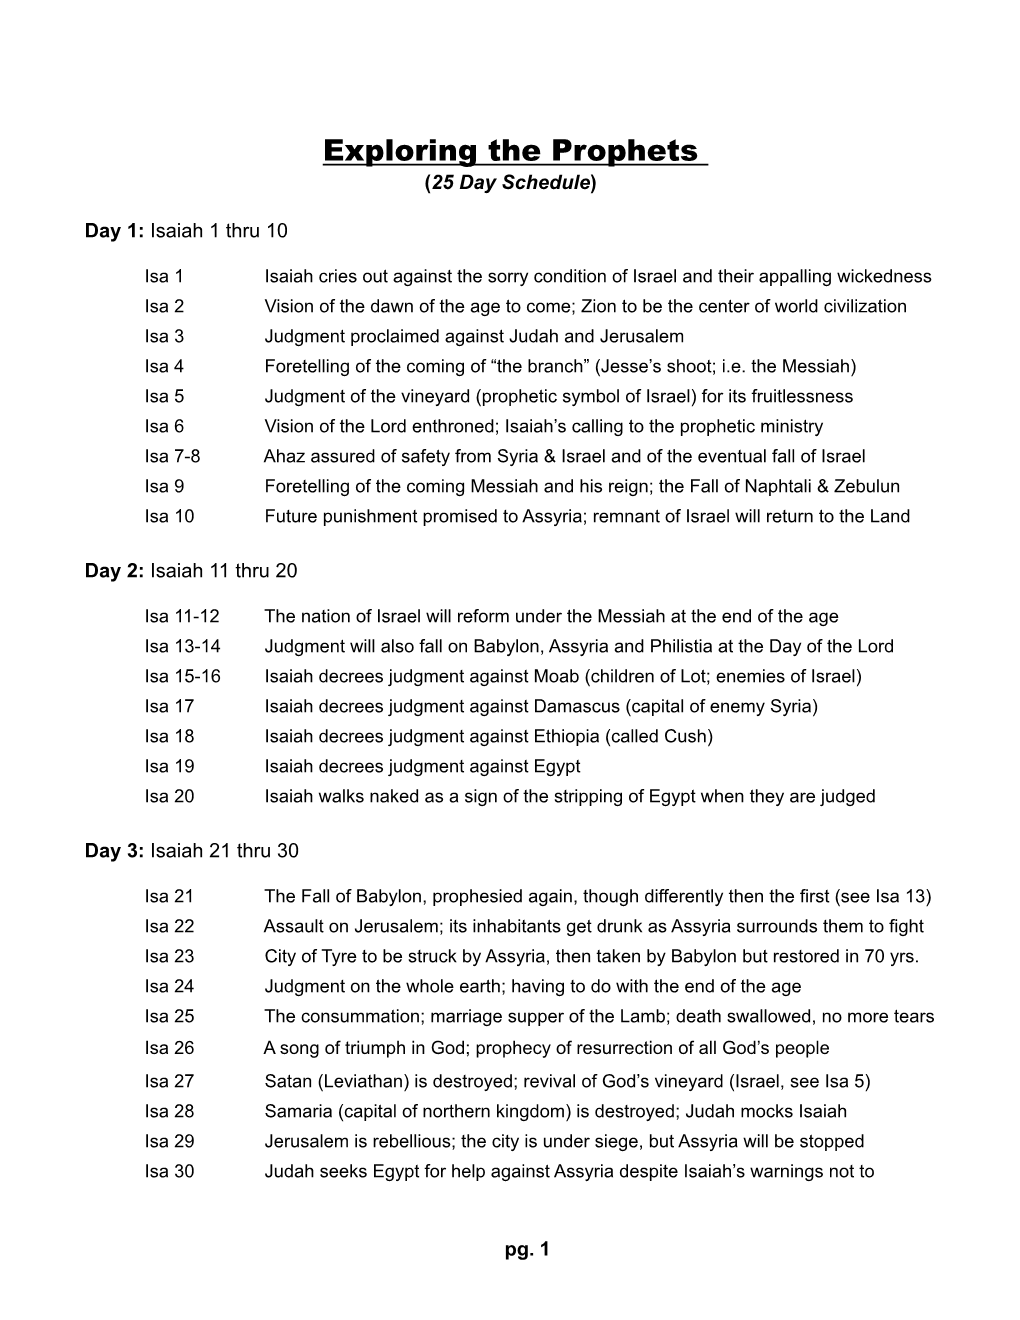 Exploring the Prophets (25 Day Schedule)